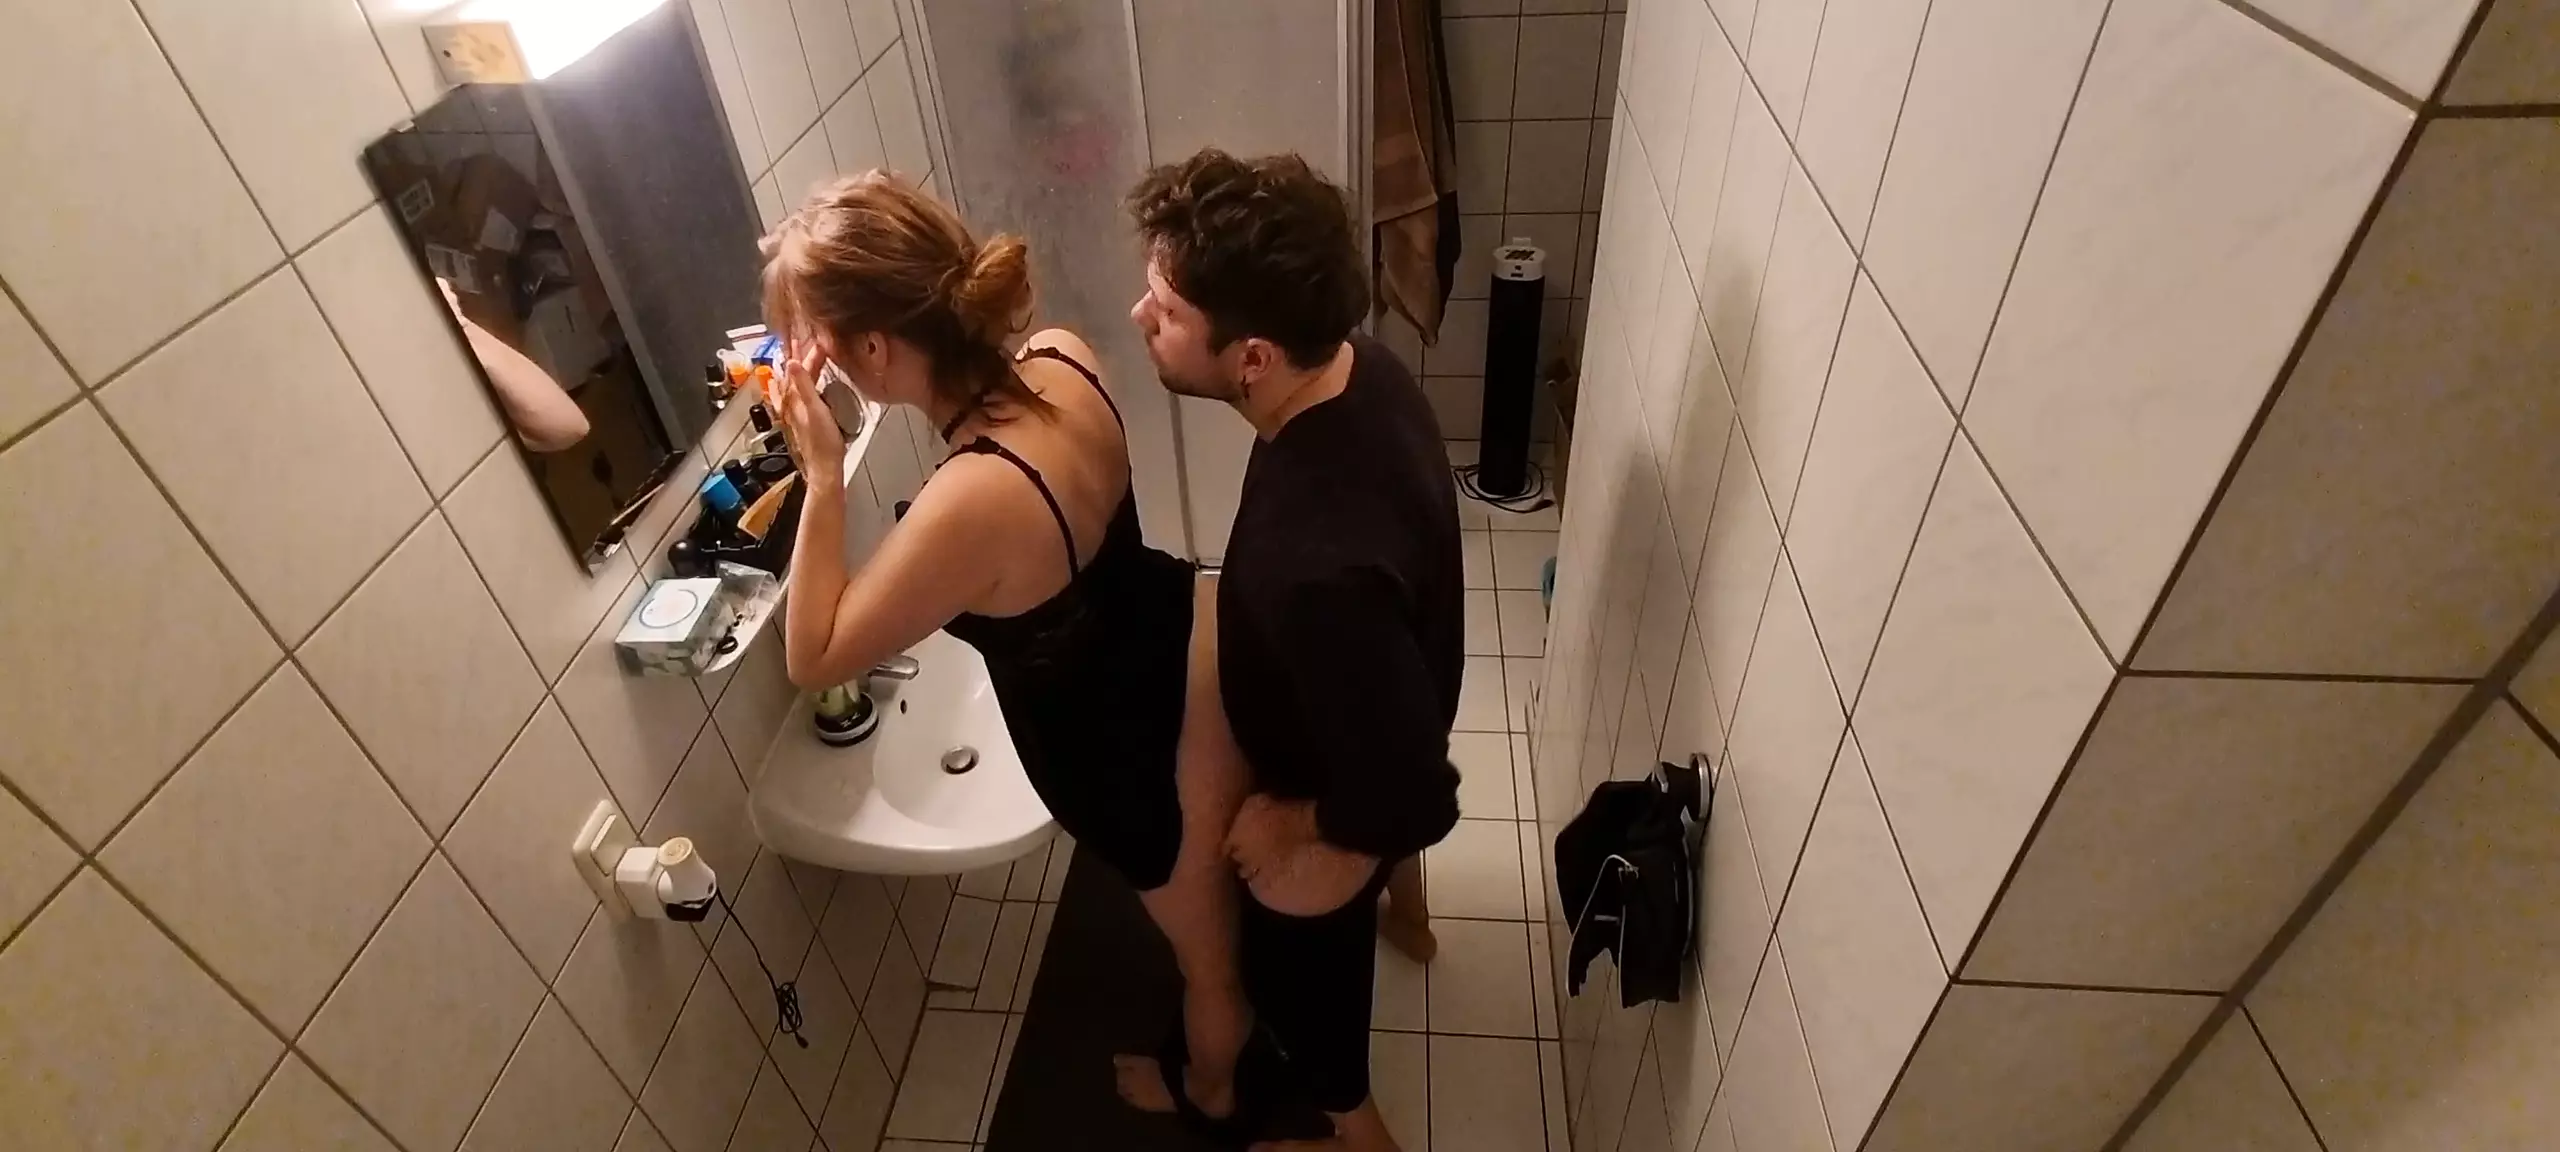 Stepsister Fucked In The Bathroom And Almost Got Caught By Stepmother photo